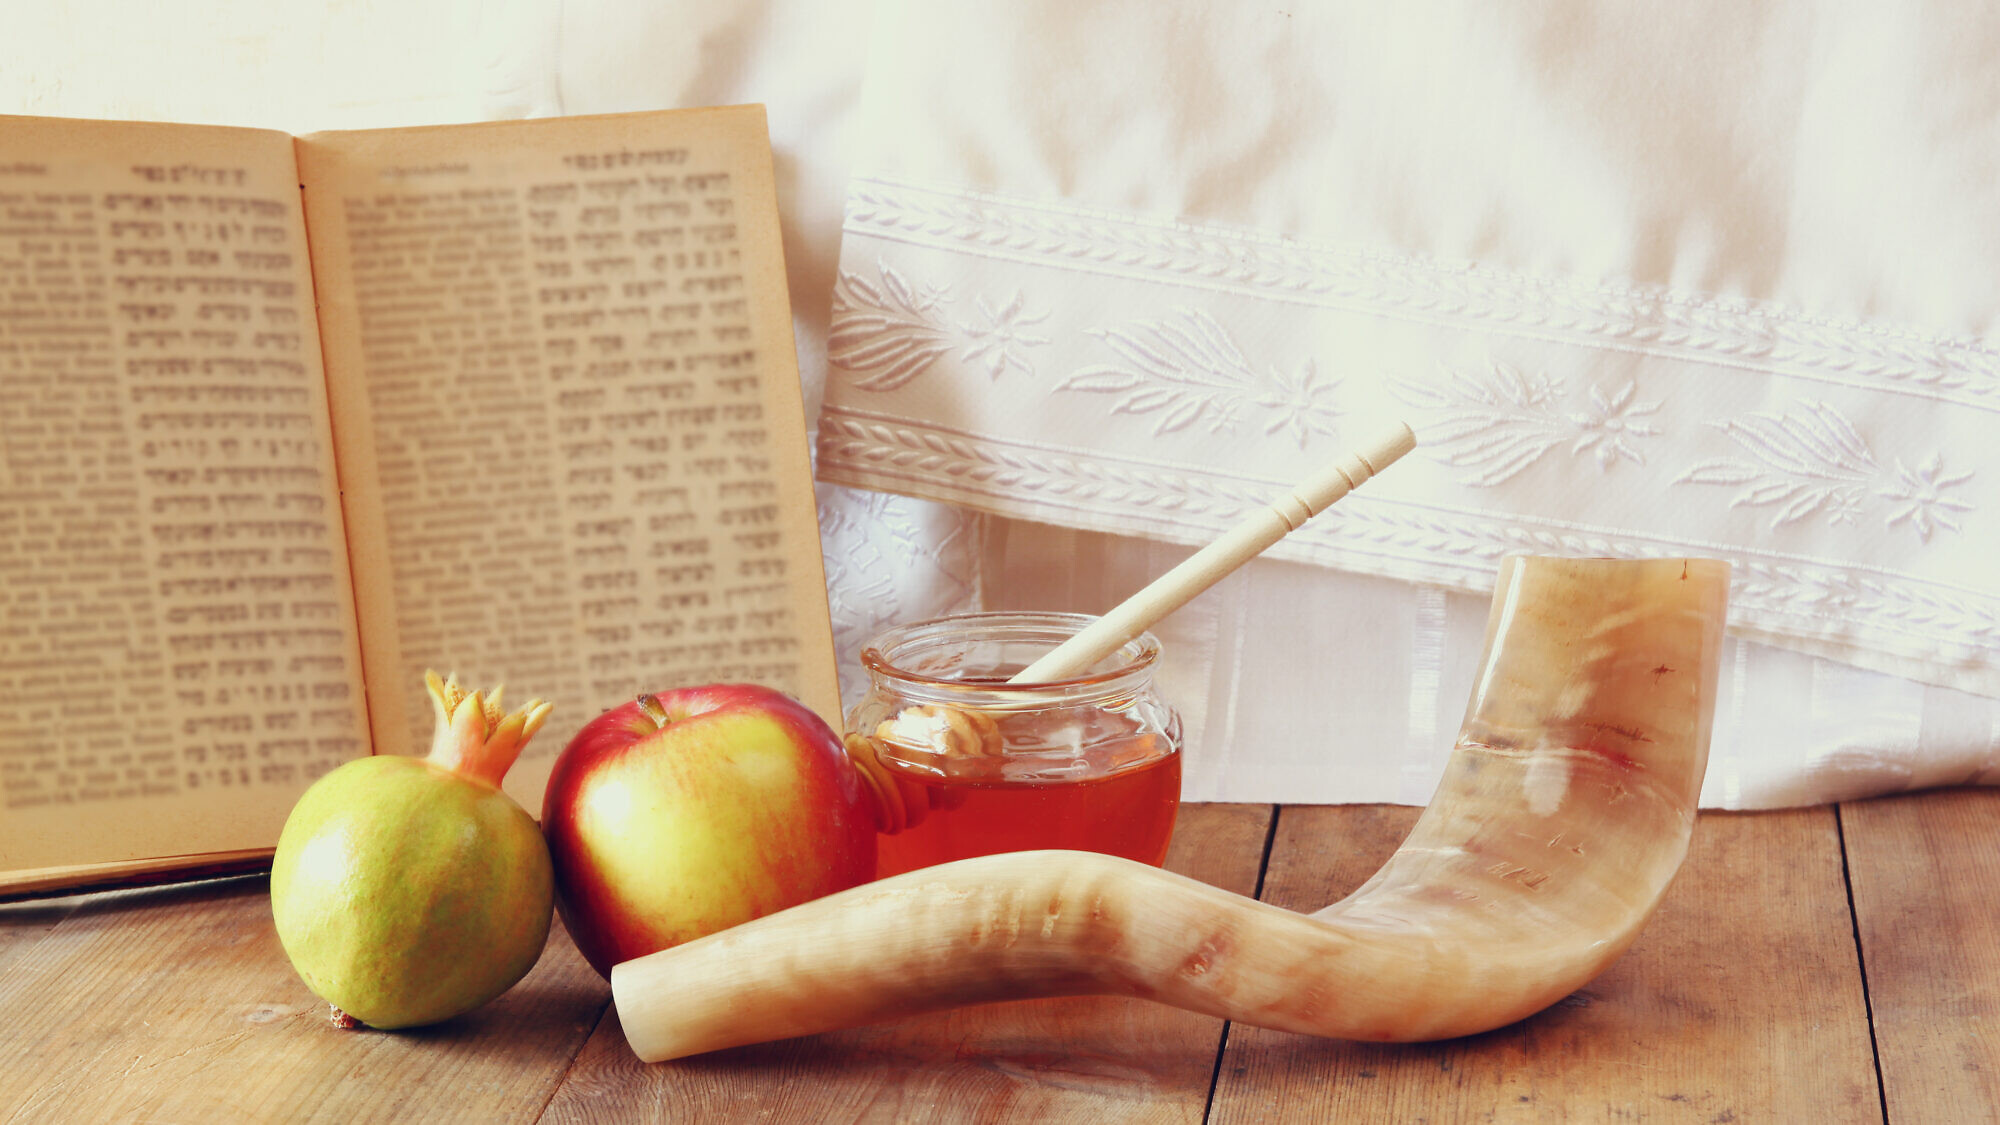 Apples and honey, a pomegranate and a shofar, all traditionally involved with the Jewish holiday of Rosh Hashanah. Credit: Tomertu/Shutterstock.